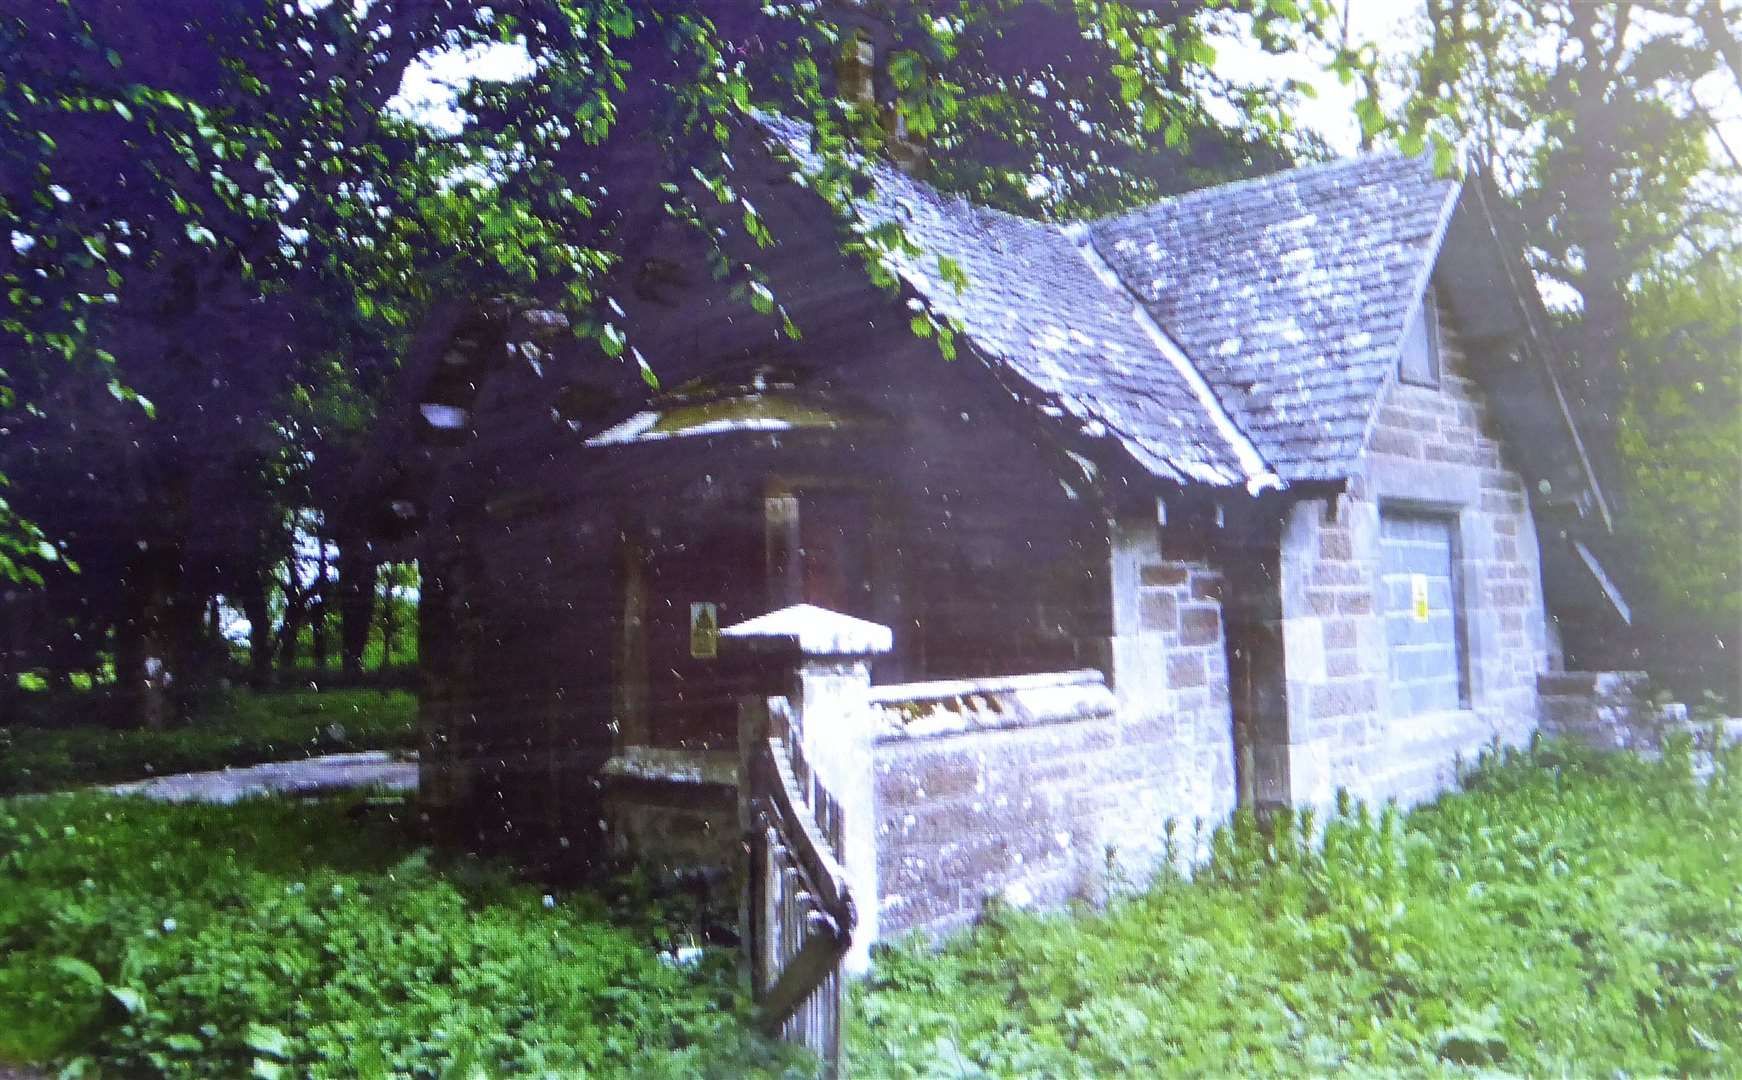 The gate lodge at the former Castlehill House.